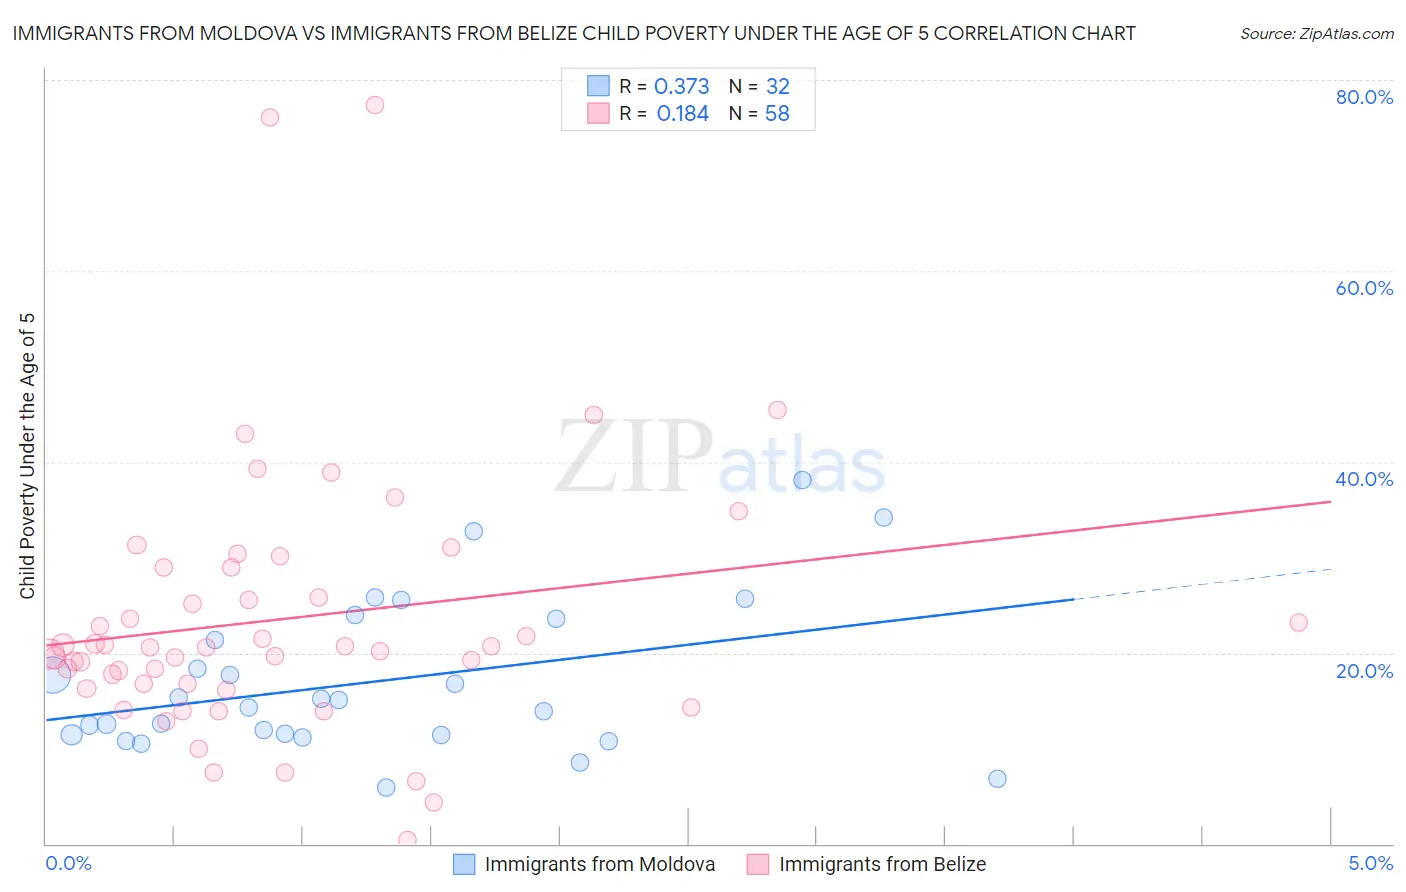 Immigrants from Moldova vs Immigrants from Belize Child Poverty Under the Age of 5